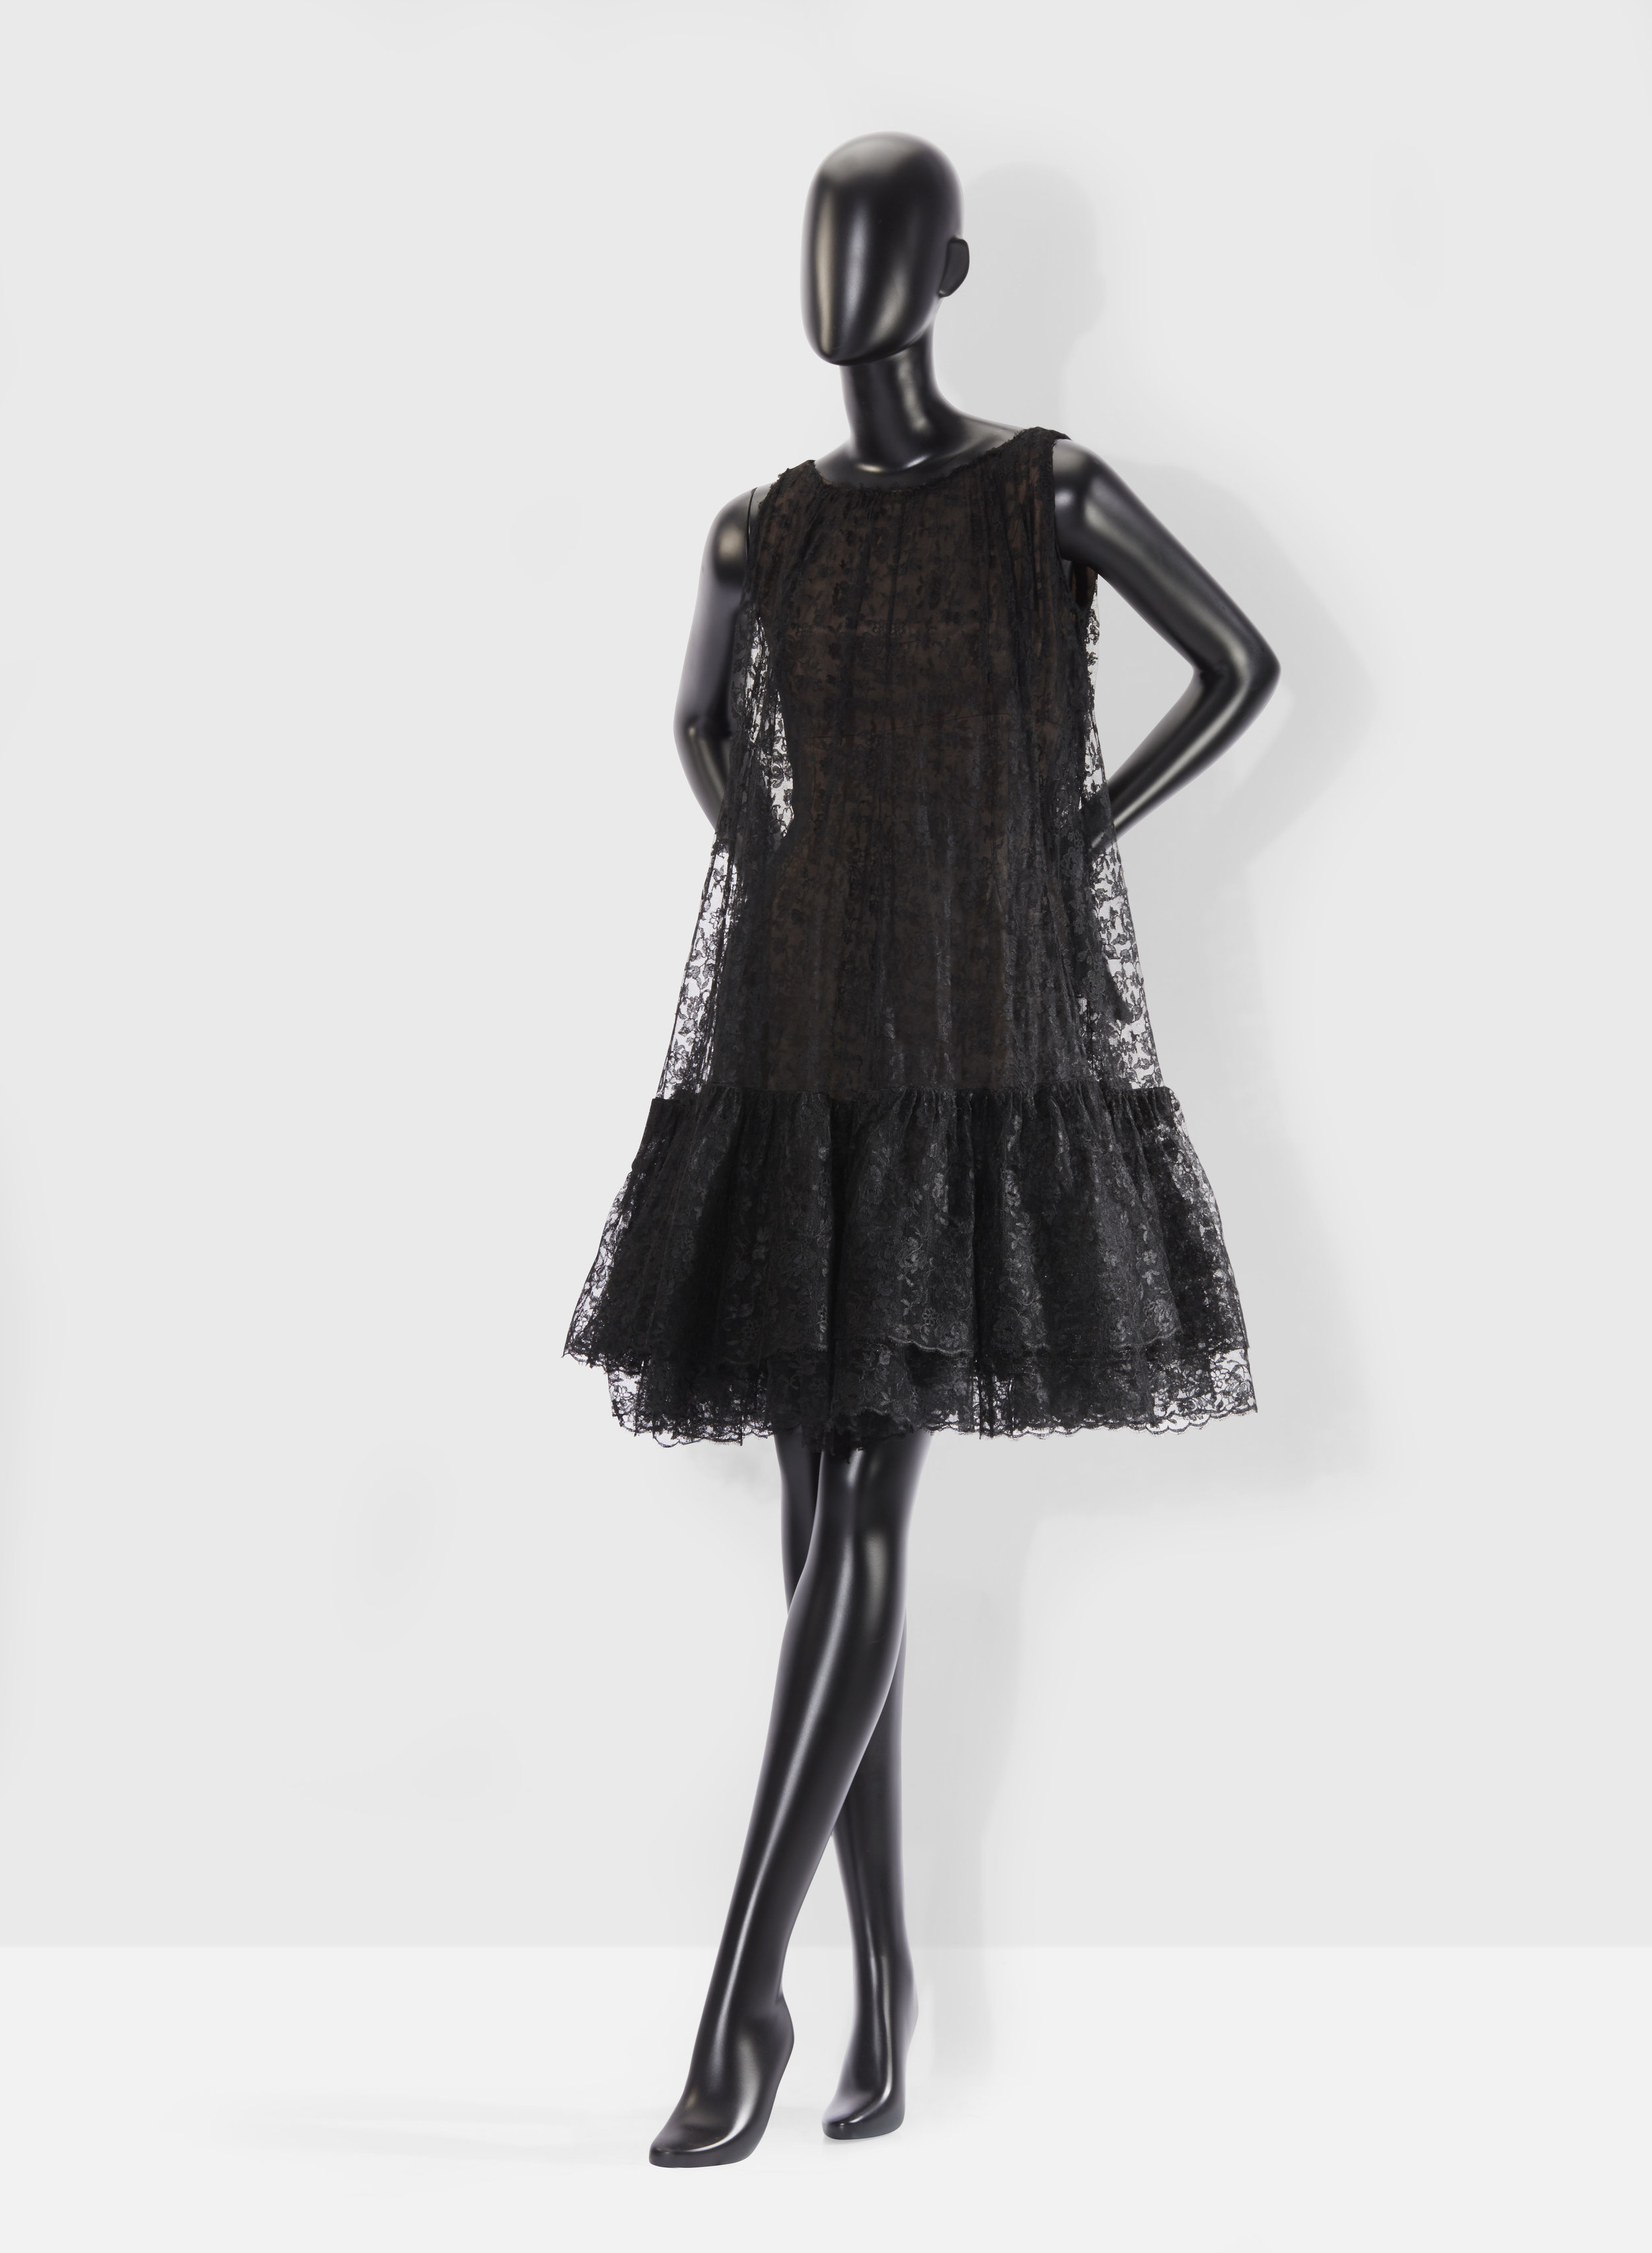  Balenciaga - 1958     A couture lace ‘baby doll’ dress from Maison Marescot  Estimate : €2,000-3,000 